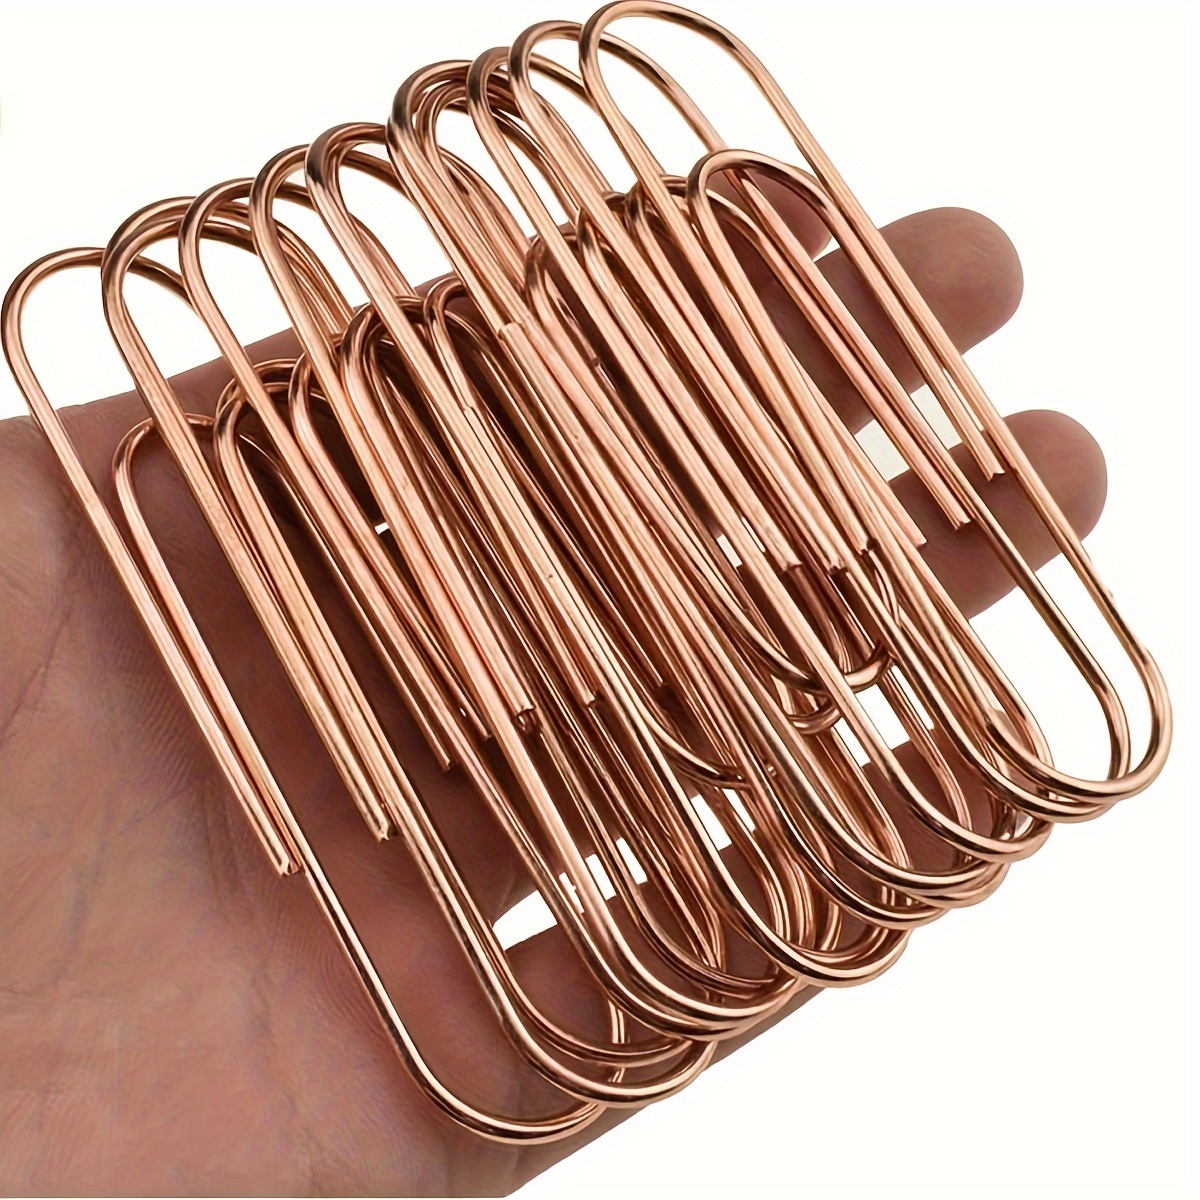 

12-pack Heavy-duty Iron Jumbo Paper Clips, Secure Clamping For Home Office School, Rust-proof & Reusable - 4-inch, Rose Golden